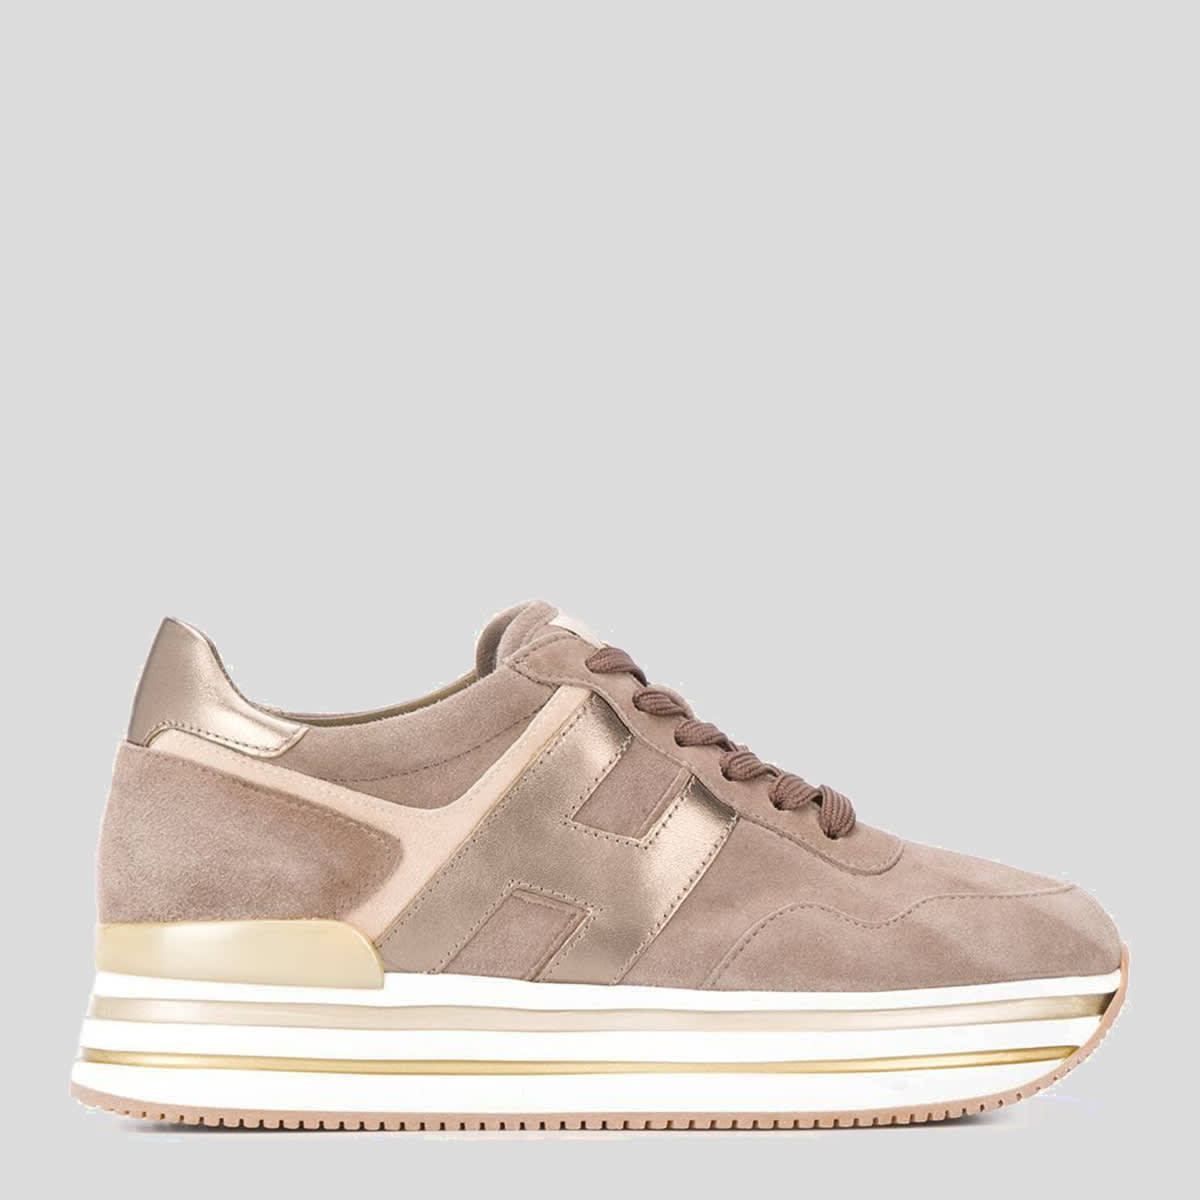 HOGAN BROWN AND GOLD LEATHER H222 MIDI SNEAKERS